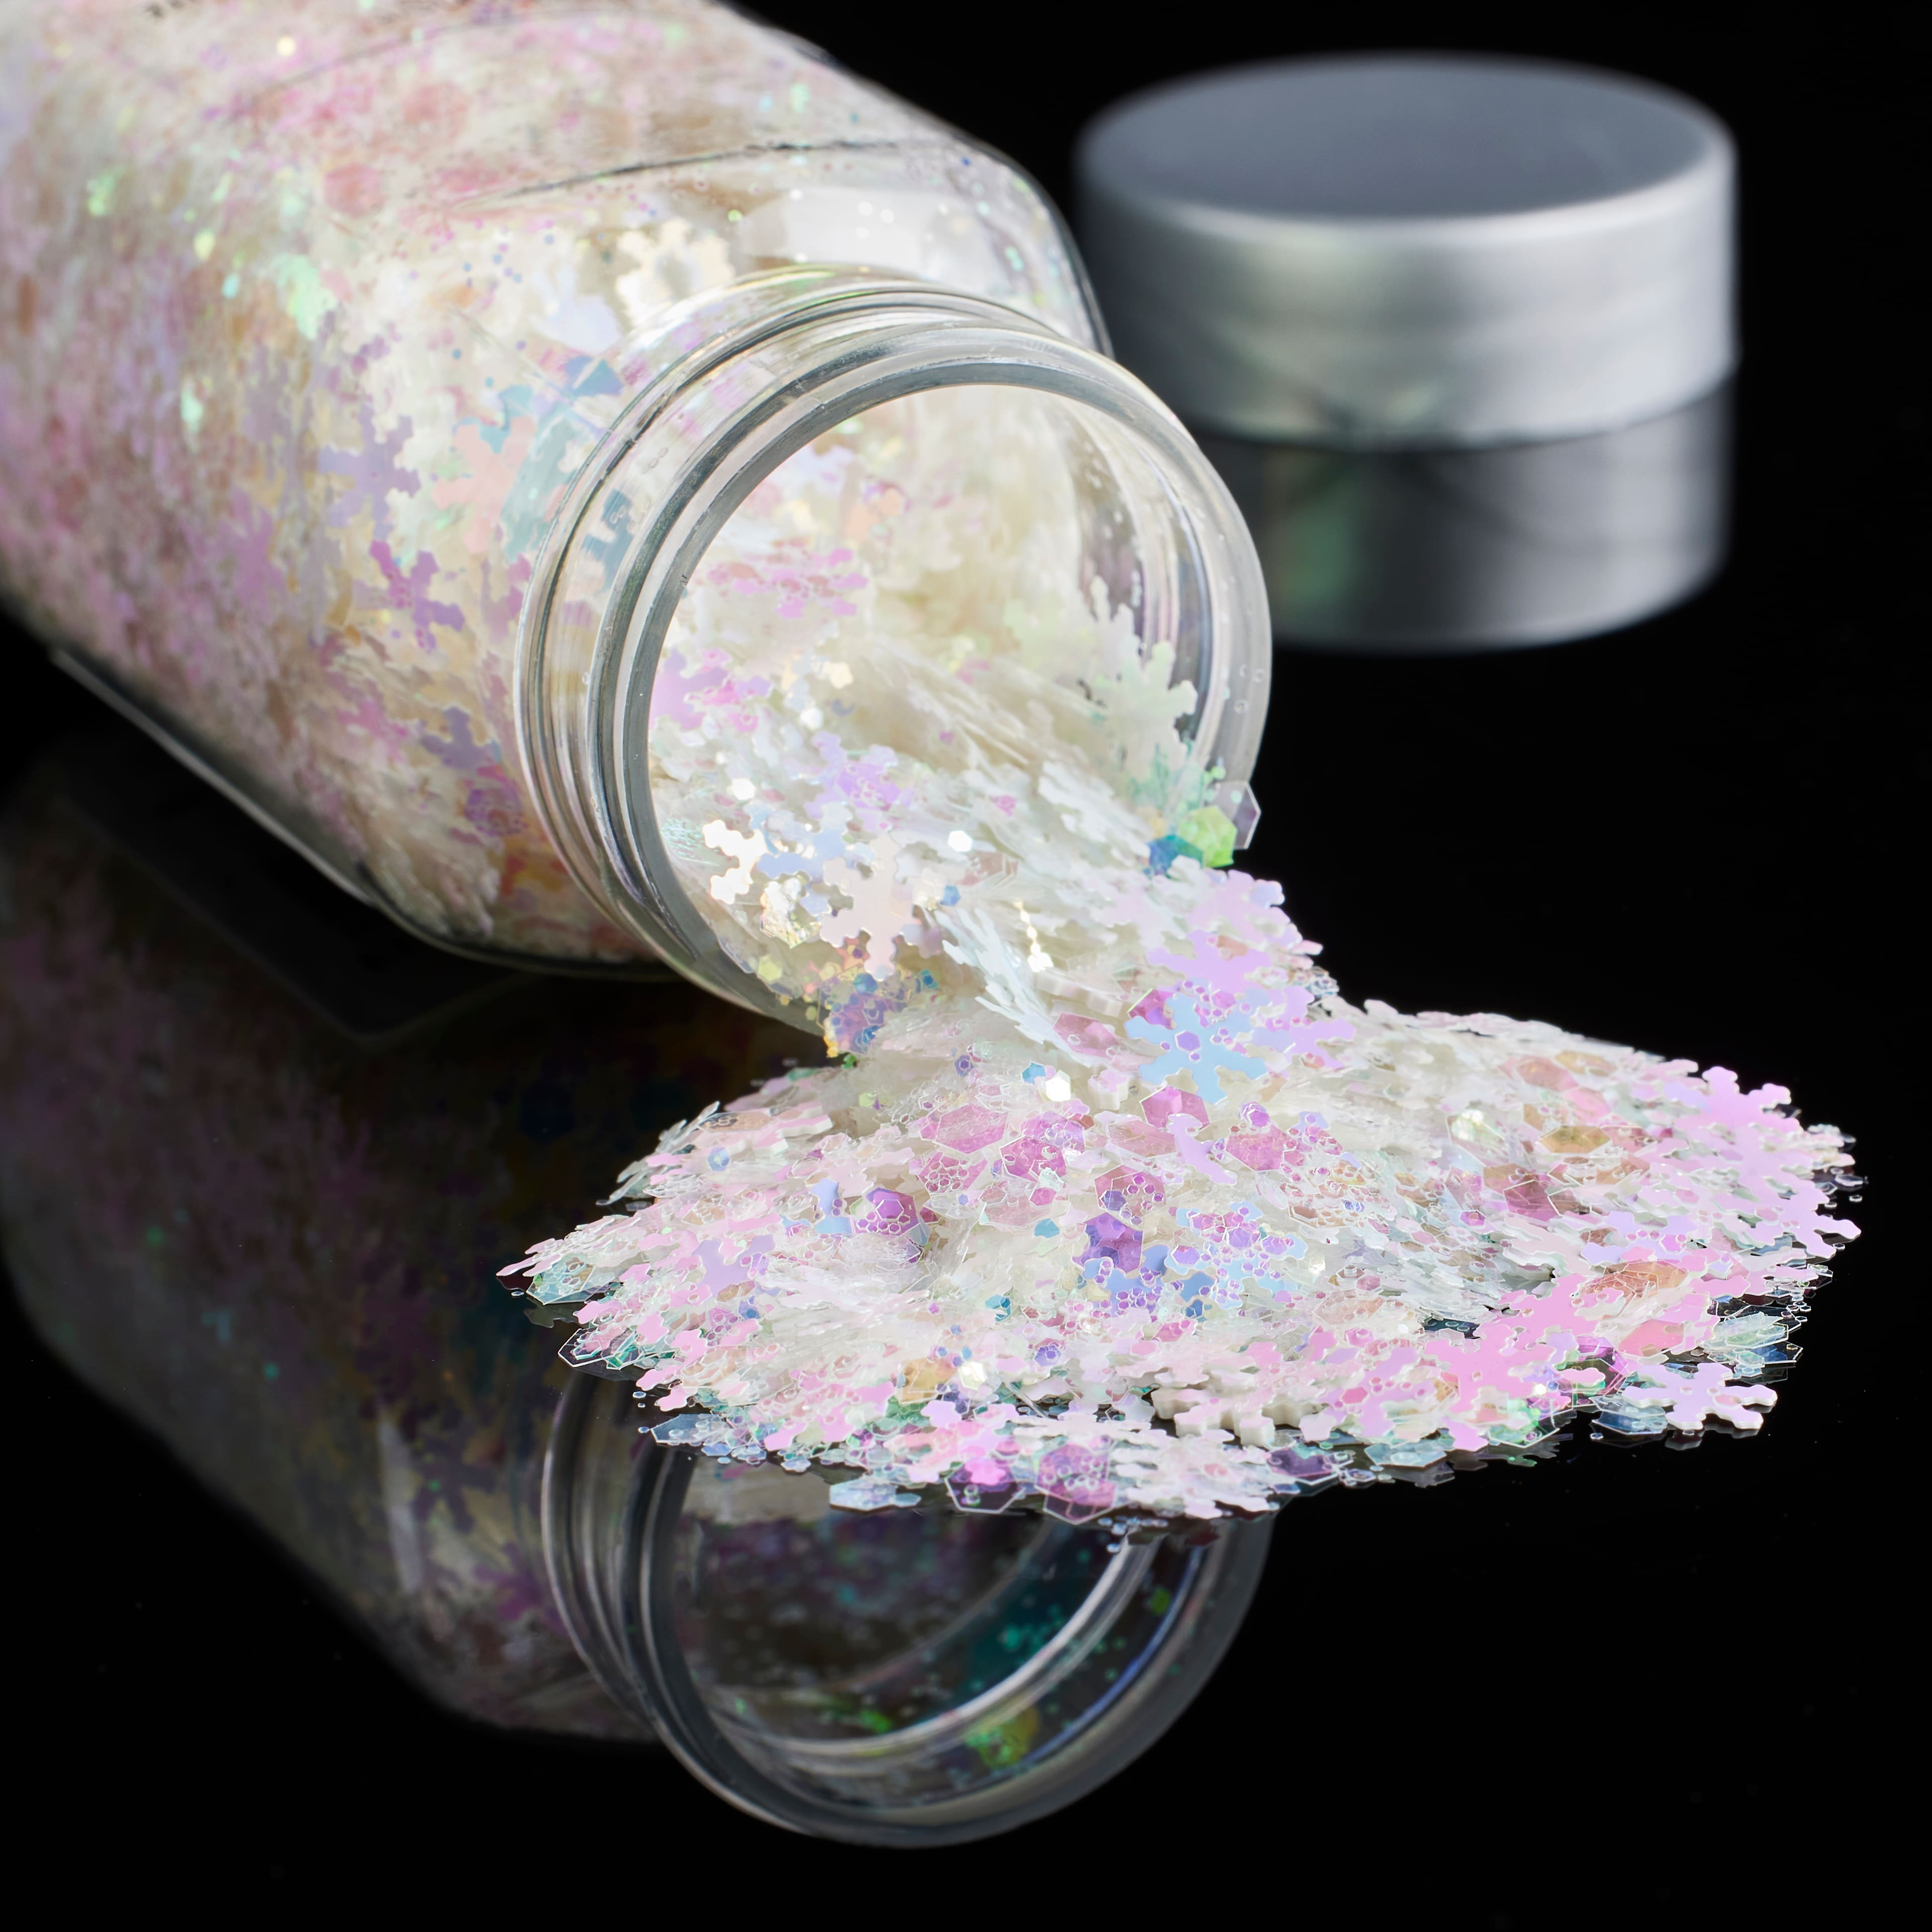 Specialty Polyester Glitter White Iridescent Snowflakes by Recollections™